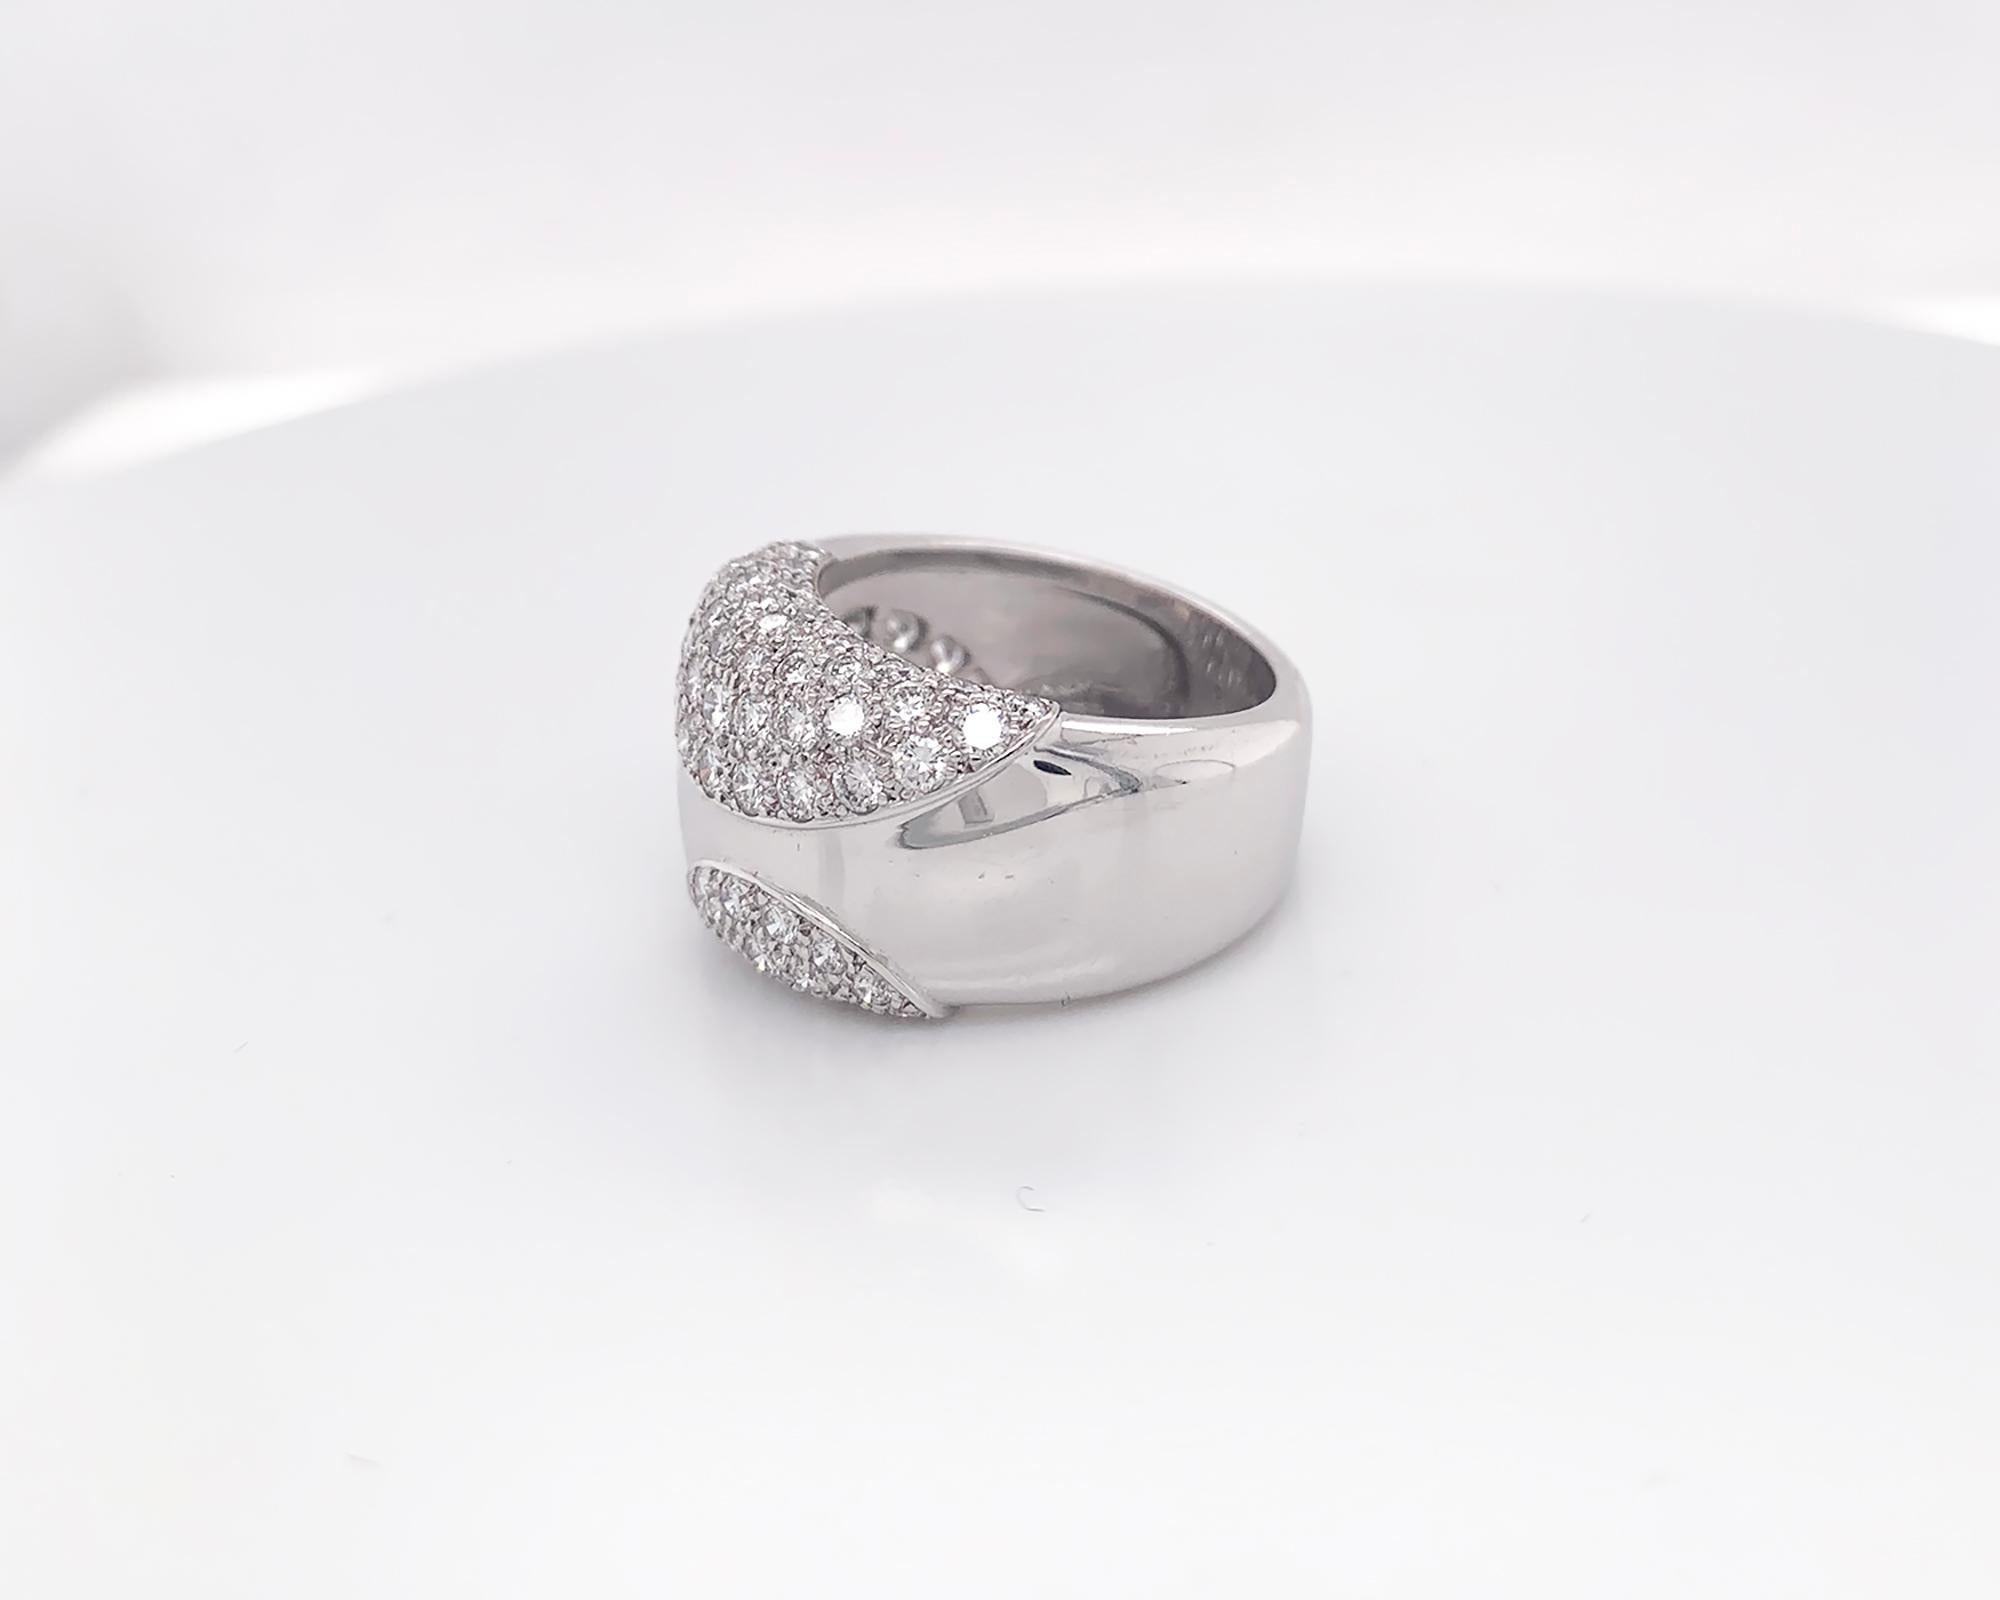 A beautiful ring made by famous Cartier. Guaranteed authenticity.
Embellished with round diamonds weighing approximately 2.00 carats and mounted in 18K white gold.
The diamonds are equivalent to F/G colors, VS clarity.
Style No. 826125
French makers